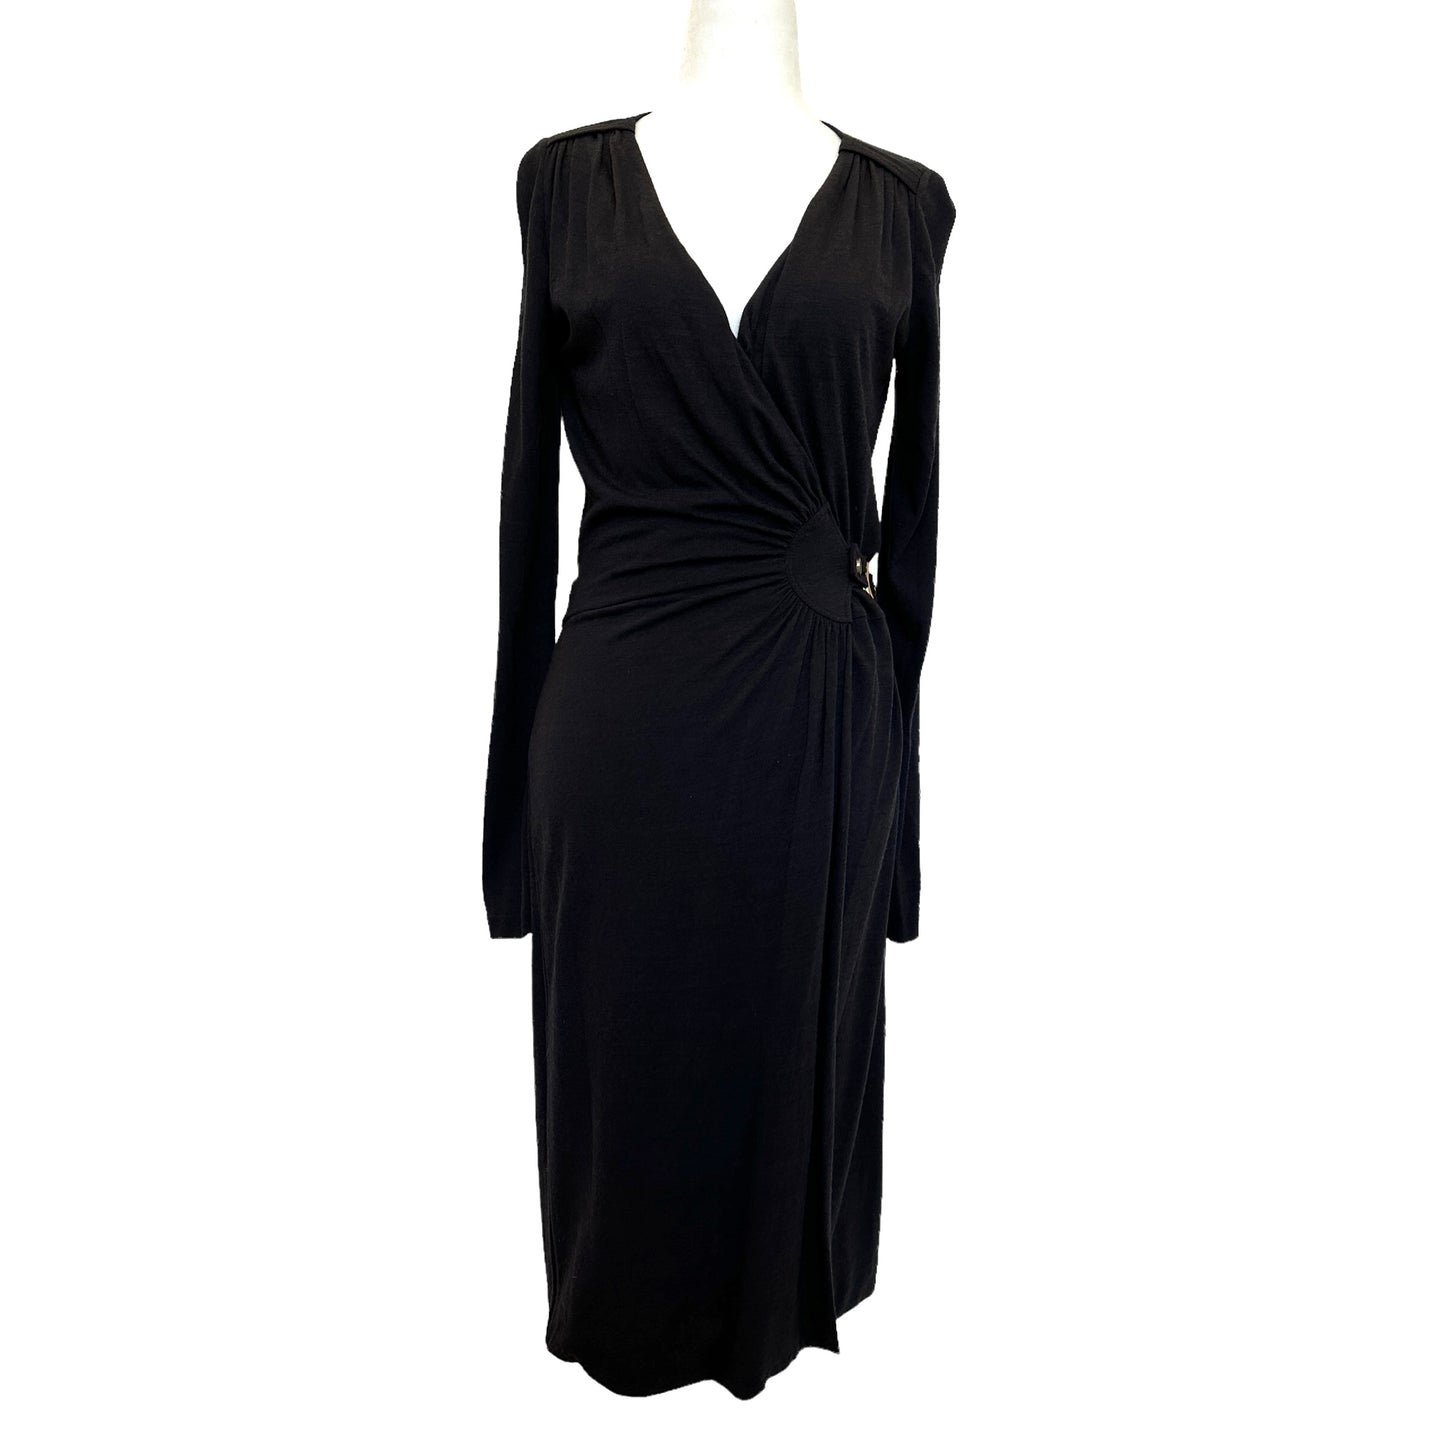 Black Dress with Gold Clasp - M